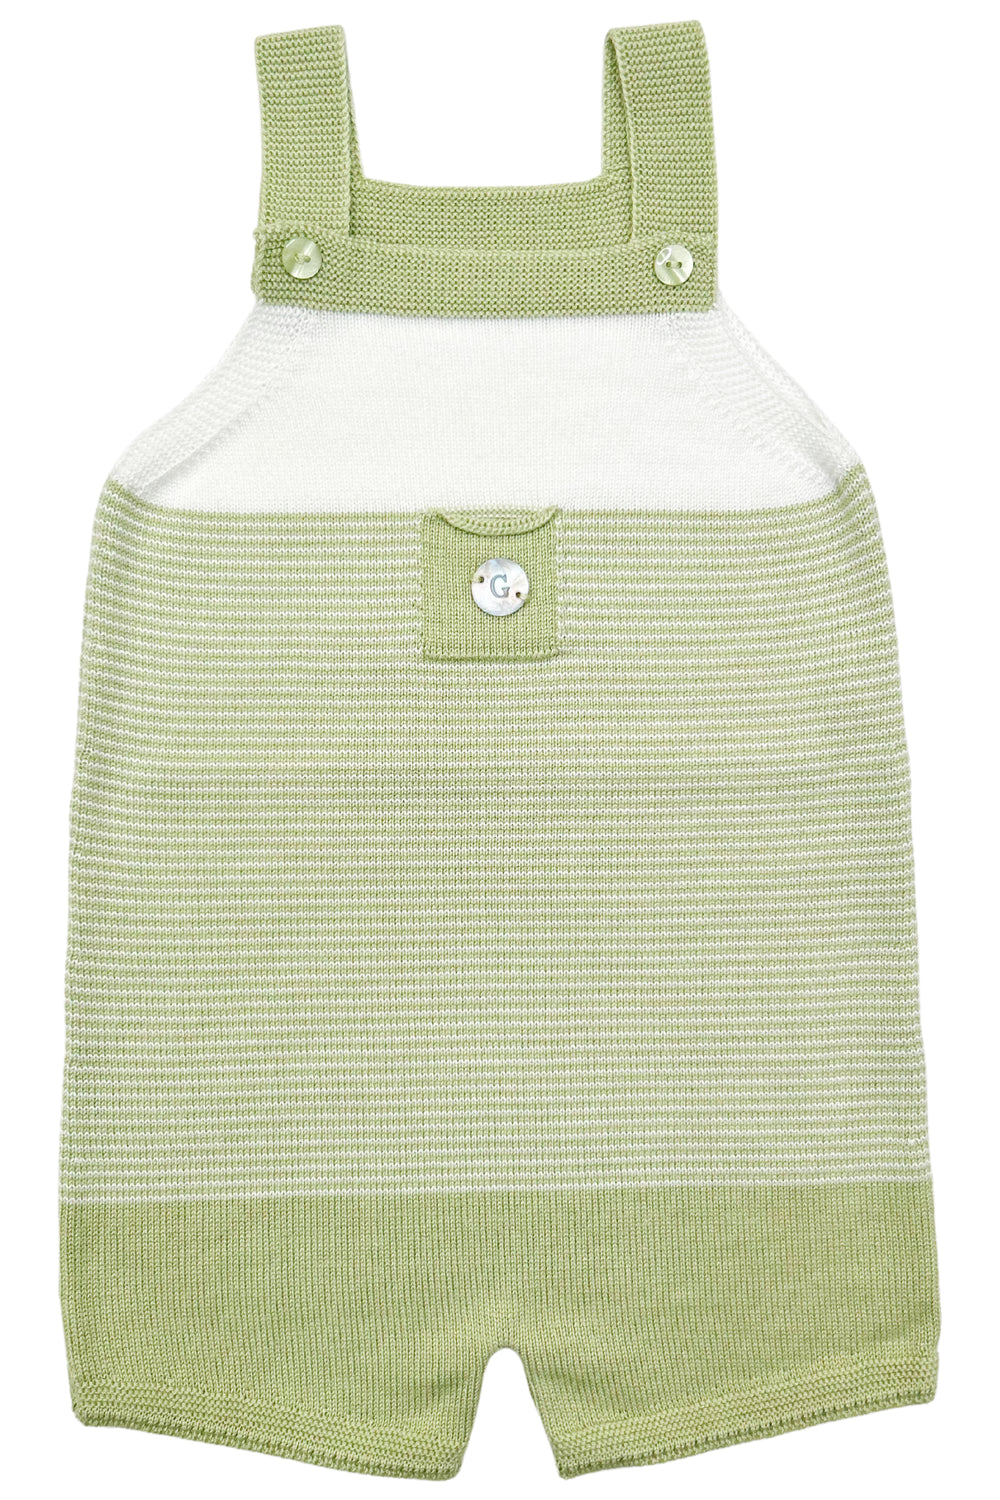 Granlei "Jagger" Pistachio Striped Knit Dungarees | Millie and John